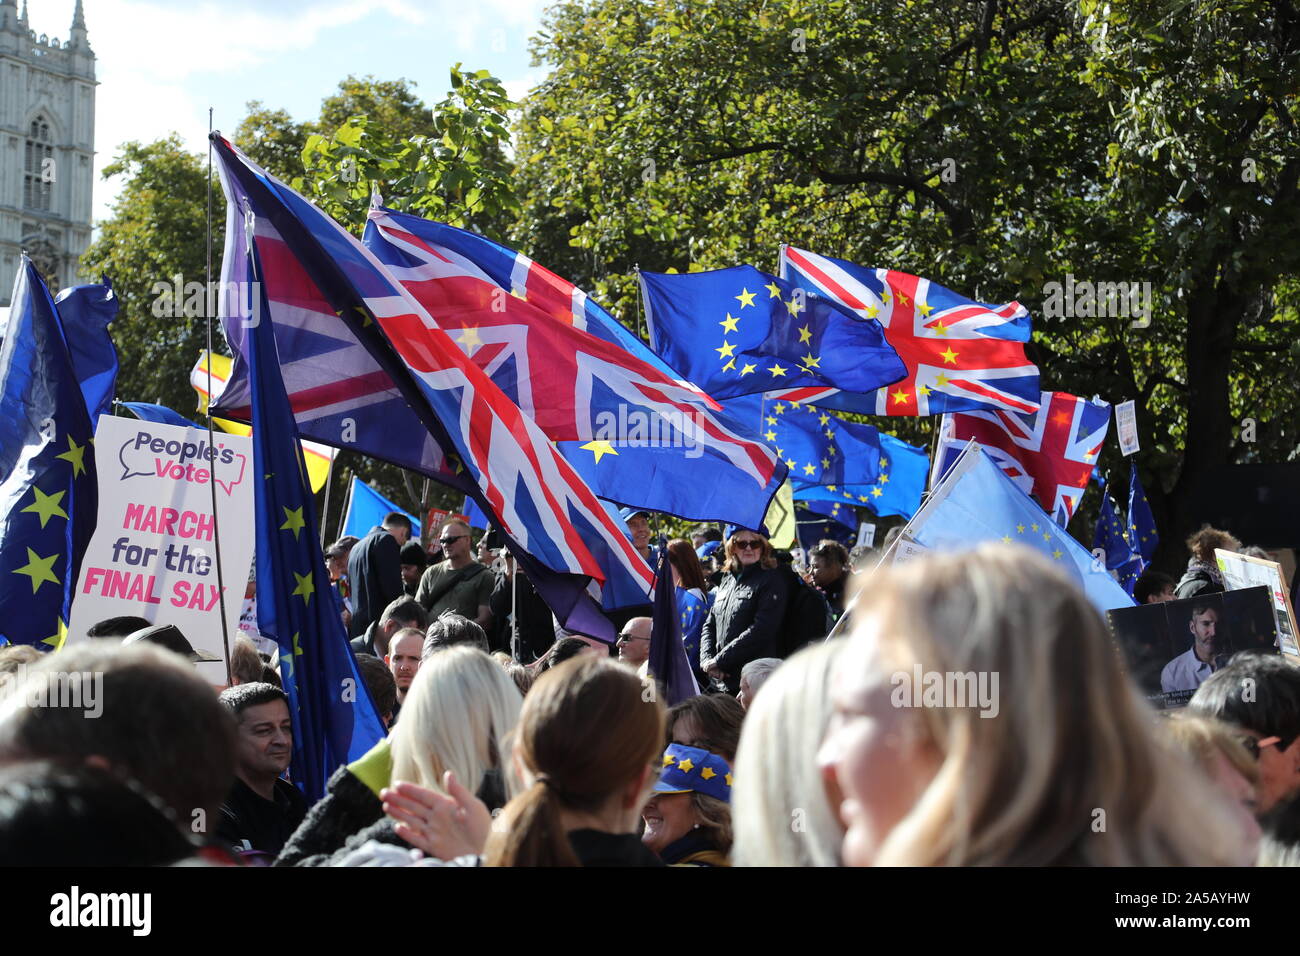 London, UK, 19th Oct 2019, Thousands of people were marching through London for a major demonstration calling for a Final Say referendum on Brexit. Organised by the People’s Vote campaign and supported by The Independent, the march took place just two weeks before the UK is scheduled to leave the EU. Campaigners are calling on the government to call a Final Say vote on any Brexit agreement or no-deal outcome. Credit: Uwe Deffner / Alamy Live News Stock Photo